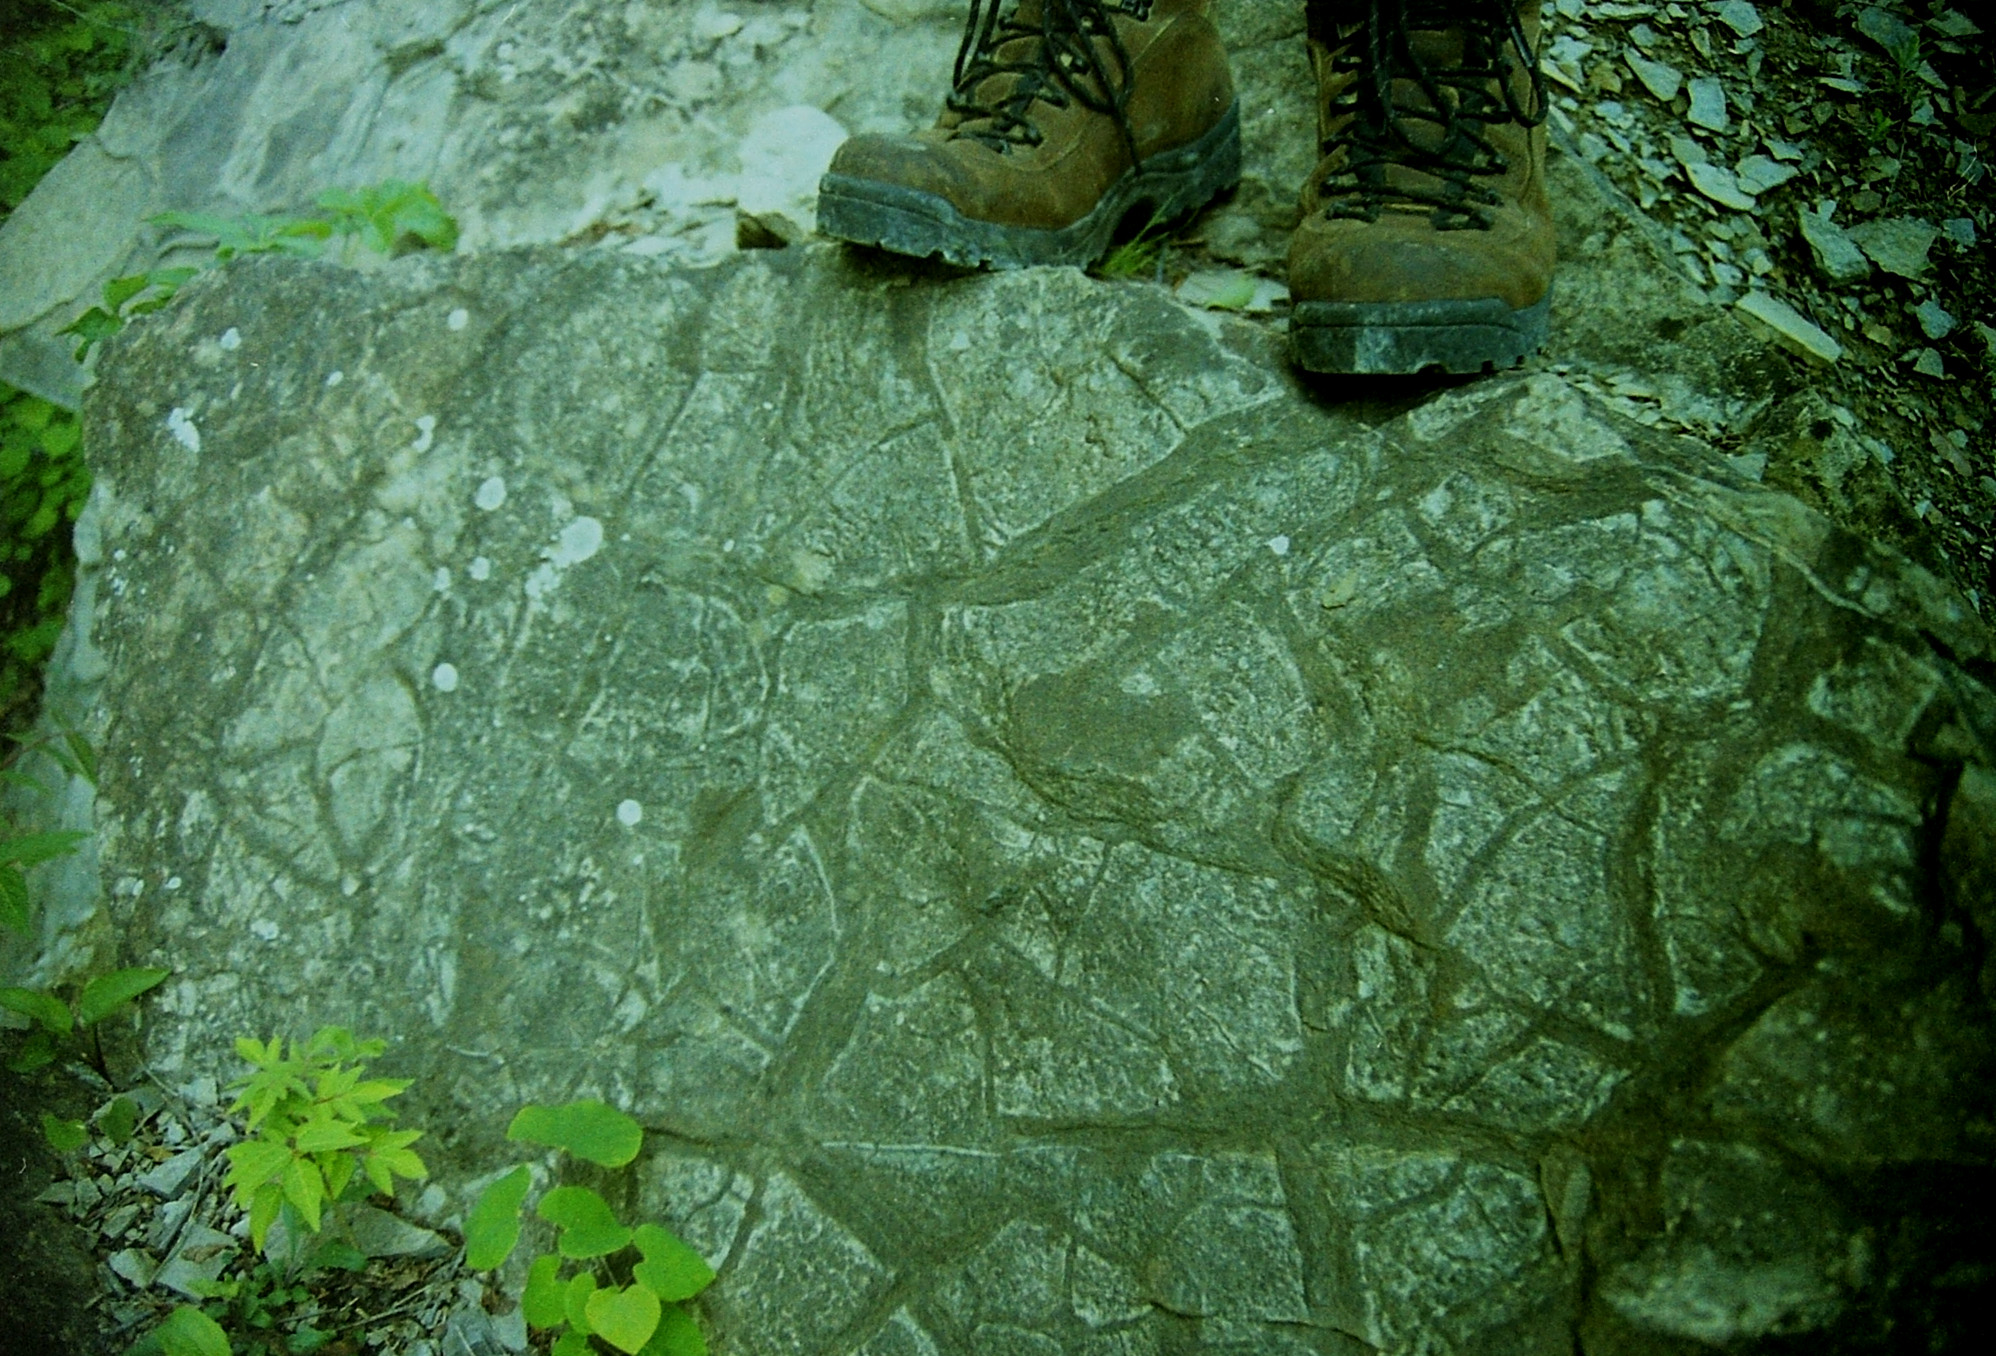 Grayish brown rock that has filled-in cracks that go in several directions, forming polygonal shapes; a pair of hiking boots is seen on top of the rock.